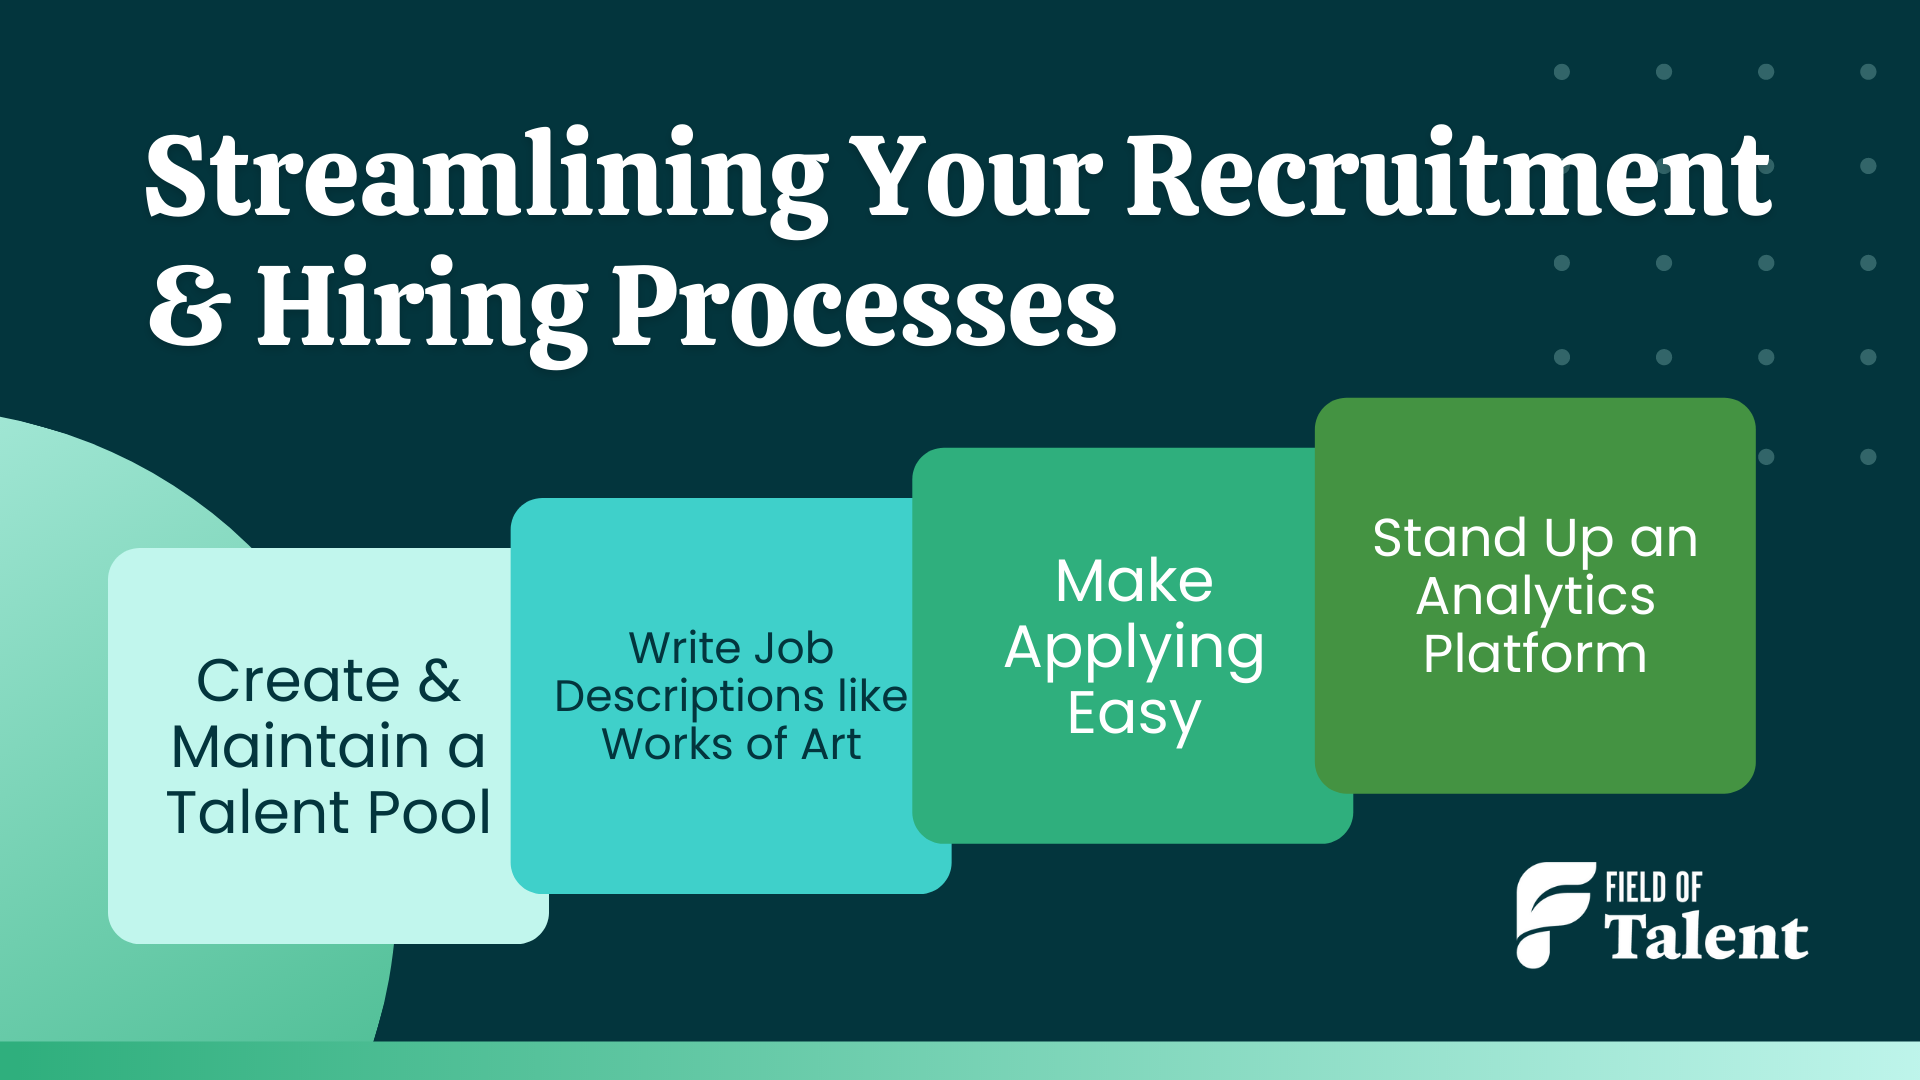 4 Steps to Streamline Your Recruitment & Hiring Processes